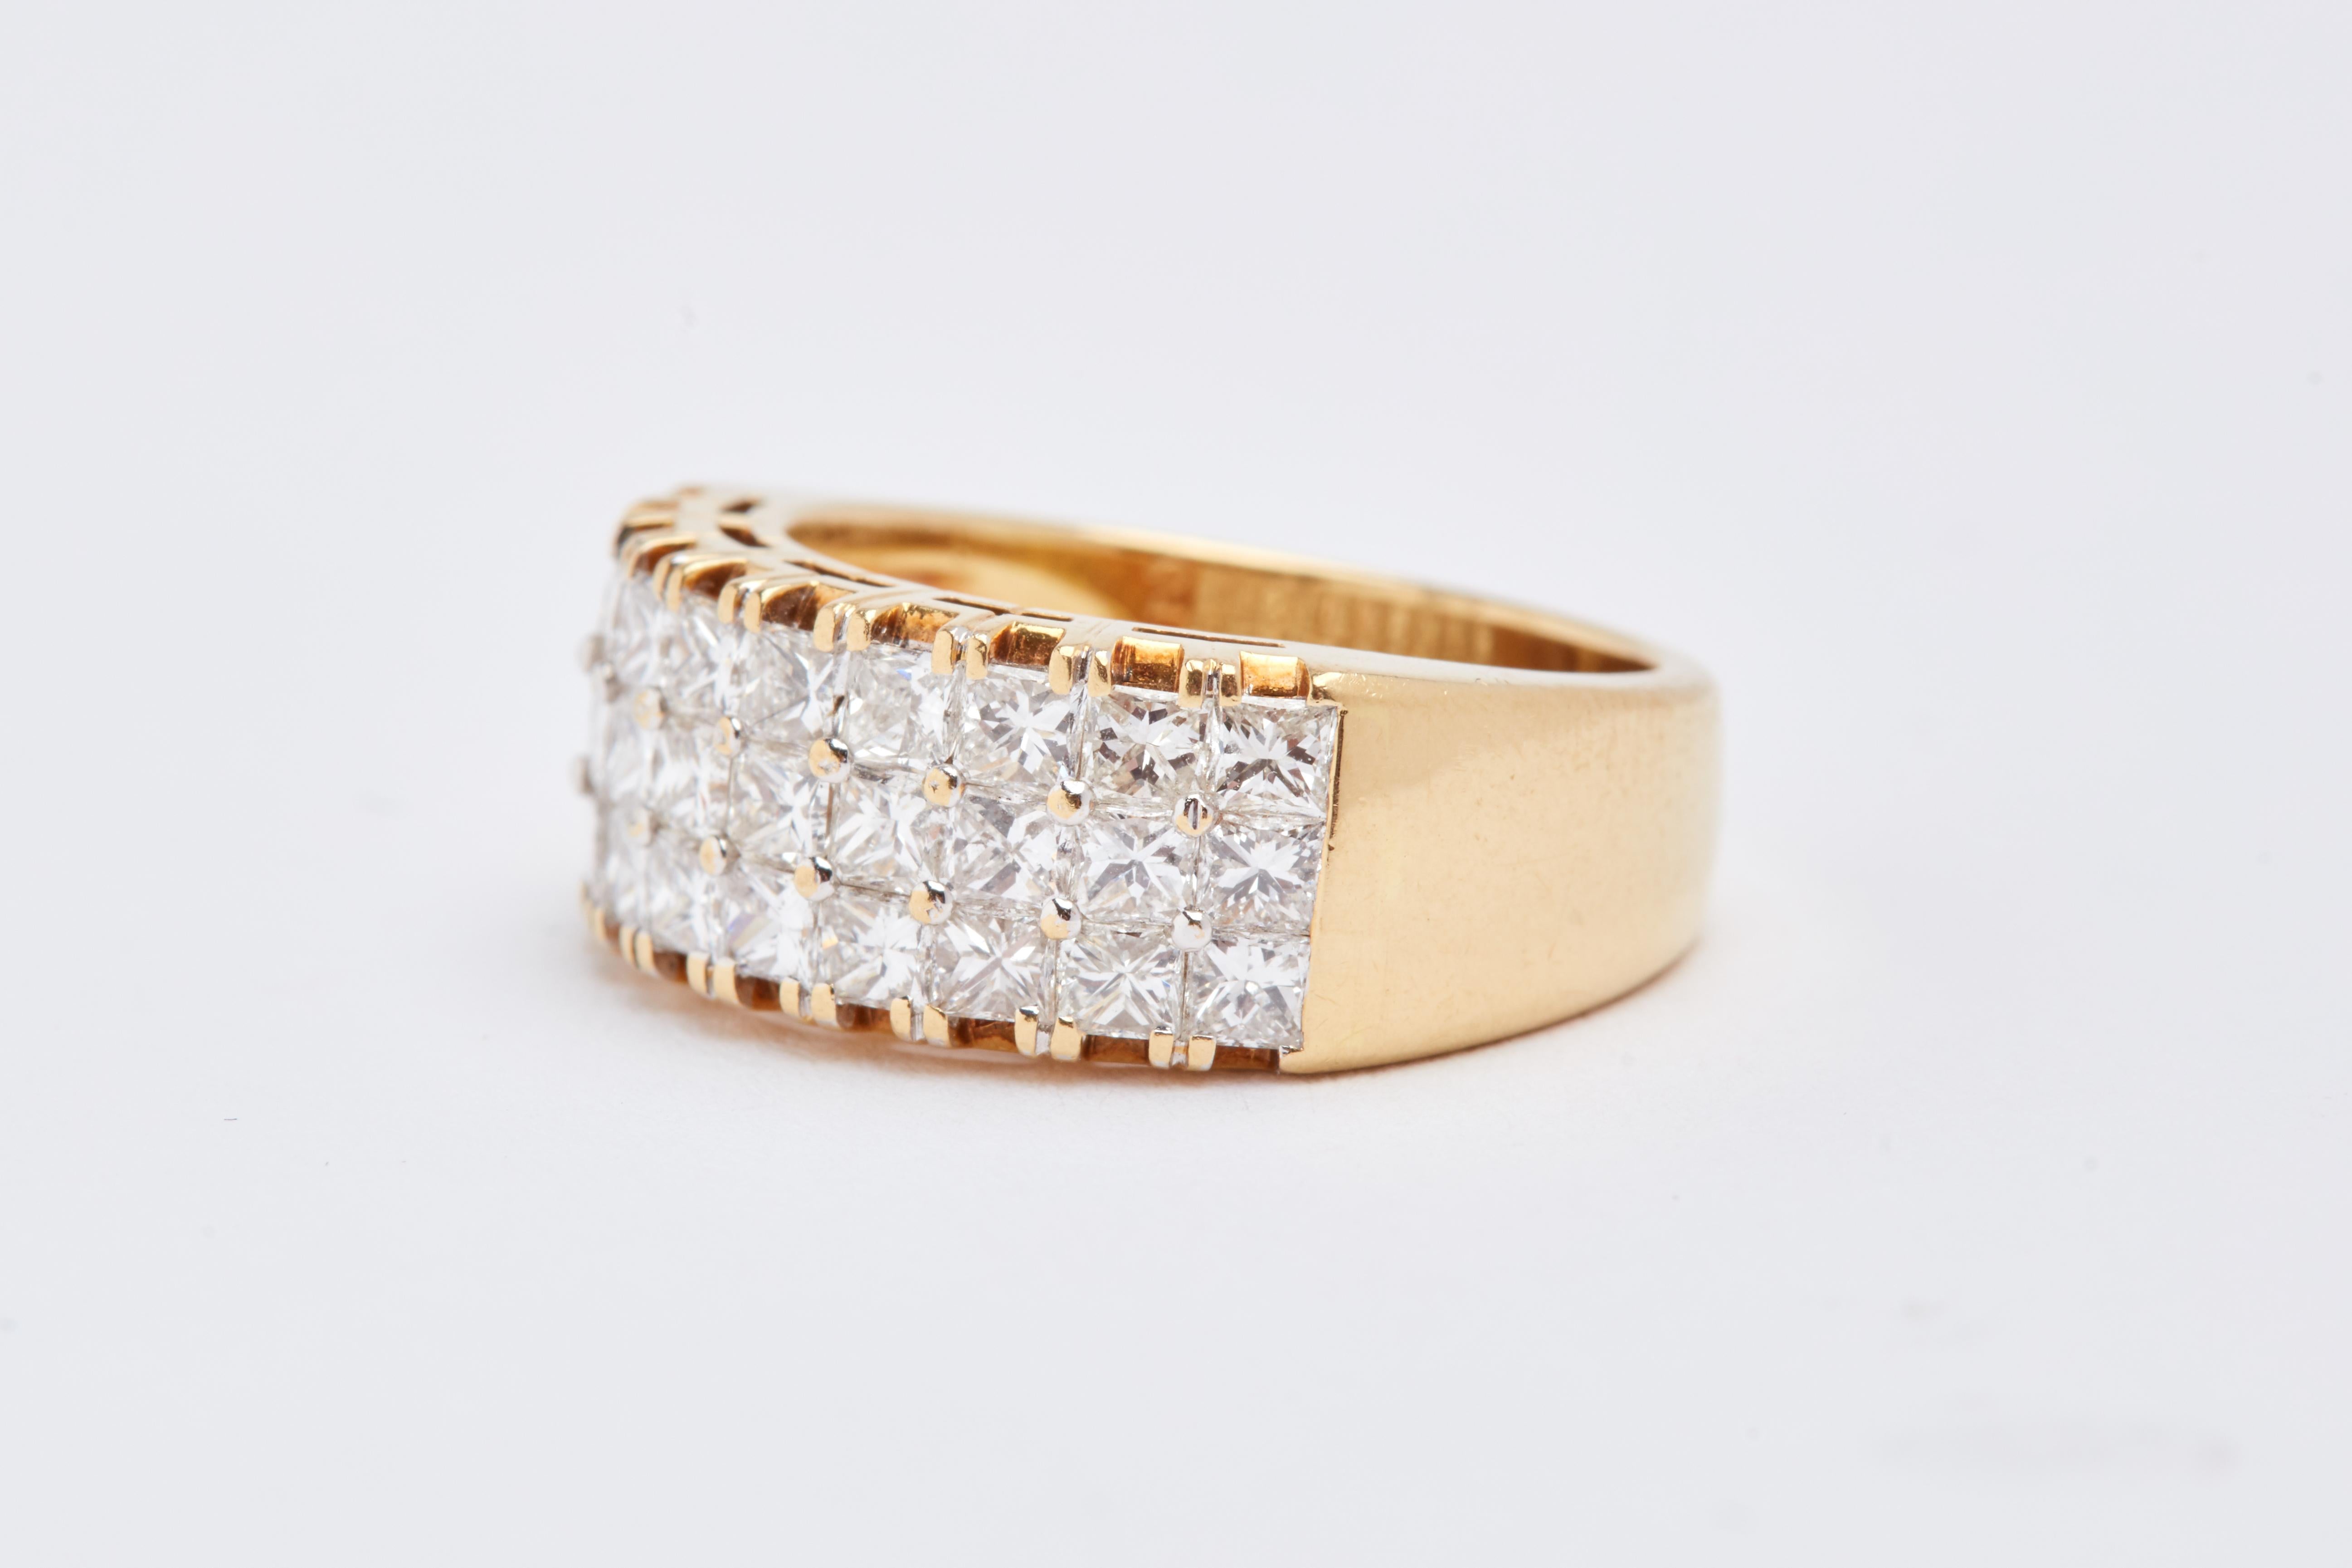 18K Yellow Gold 3 Row Diamond Ring. 30 white round diamonds weighing aprox 3 carats total. rings is size 6 and 3/4. All diamonds are F-G in color and VS clarity. 